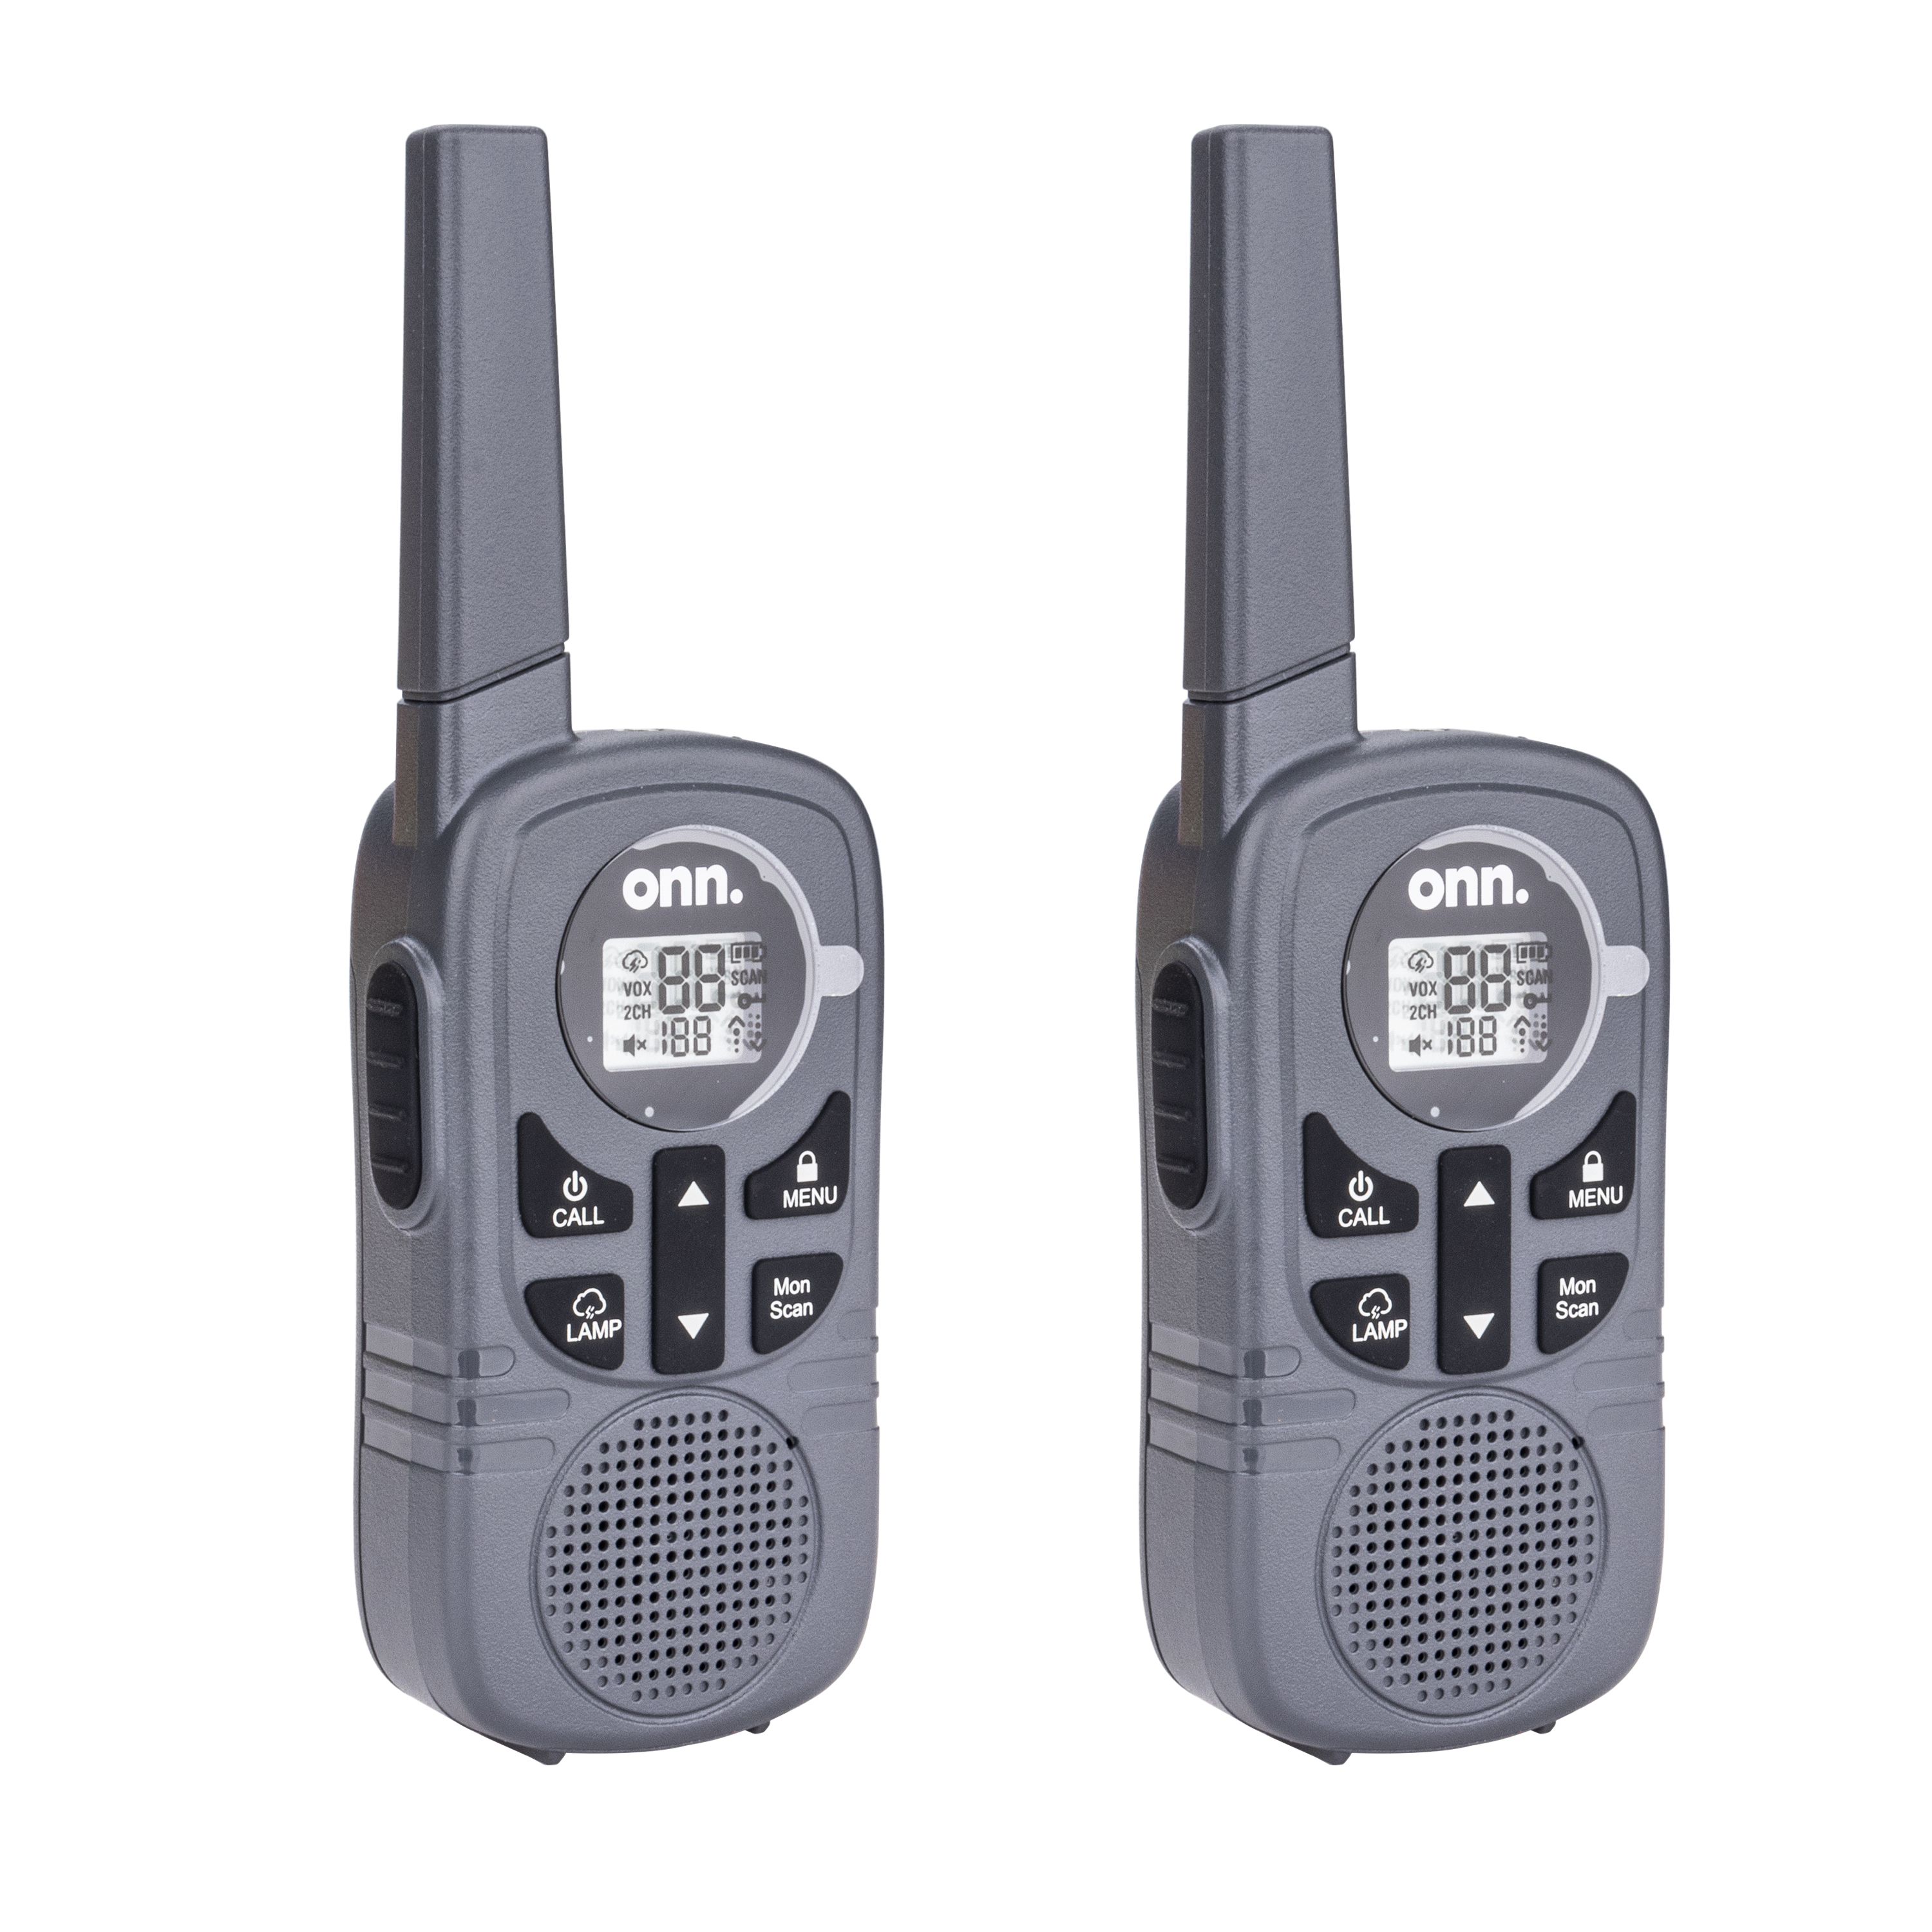 Onn. 16 Miles Walkie Talkies 2 pack  with Two Way Radios, LED Light, 121 privacy Channels - image 1 of 10